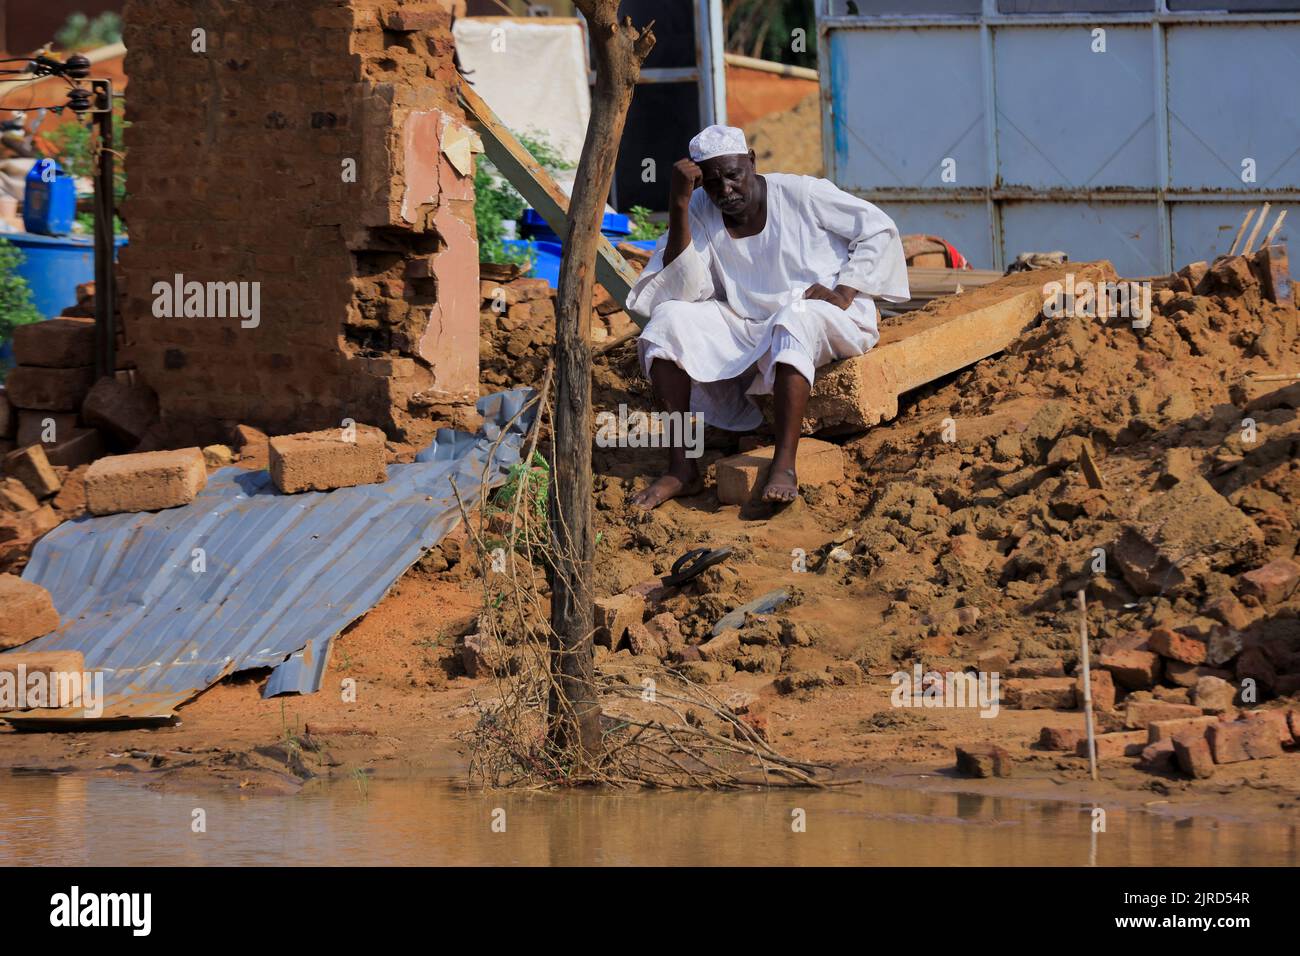 A man rests after seeing the water damage to his house during floods in Al-Managil locality, in  Jazeera State, Sudan August 23, 2022. REUTERS/Mohamed Nureldin Abdallah Stock Photo